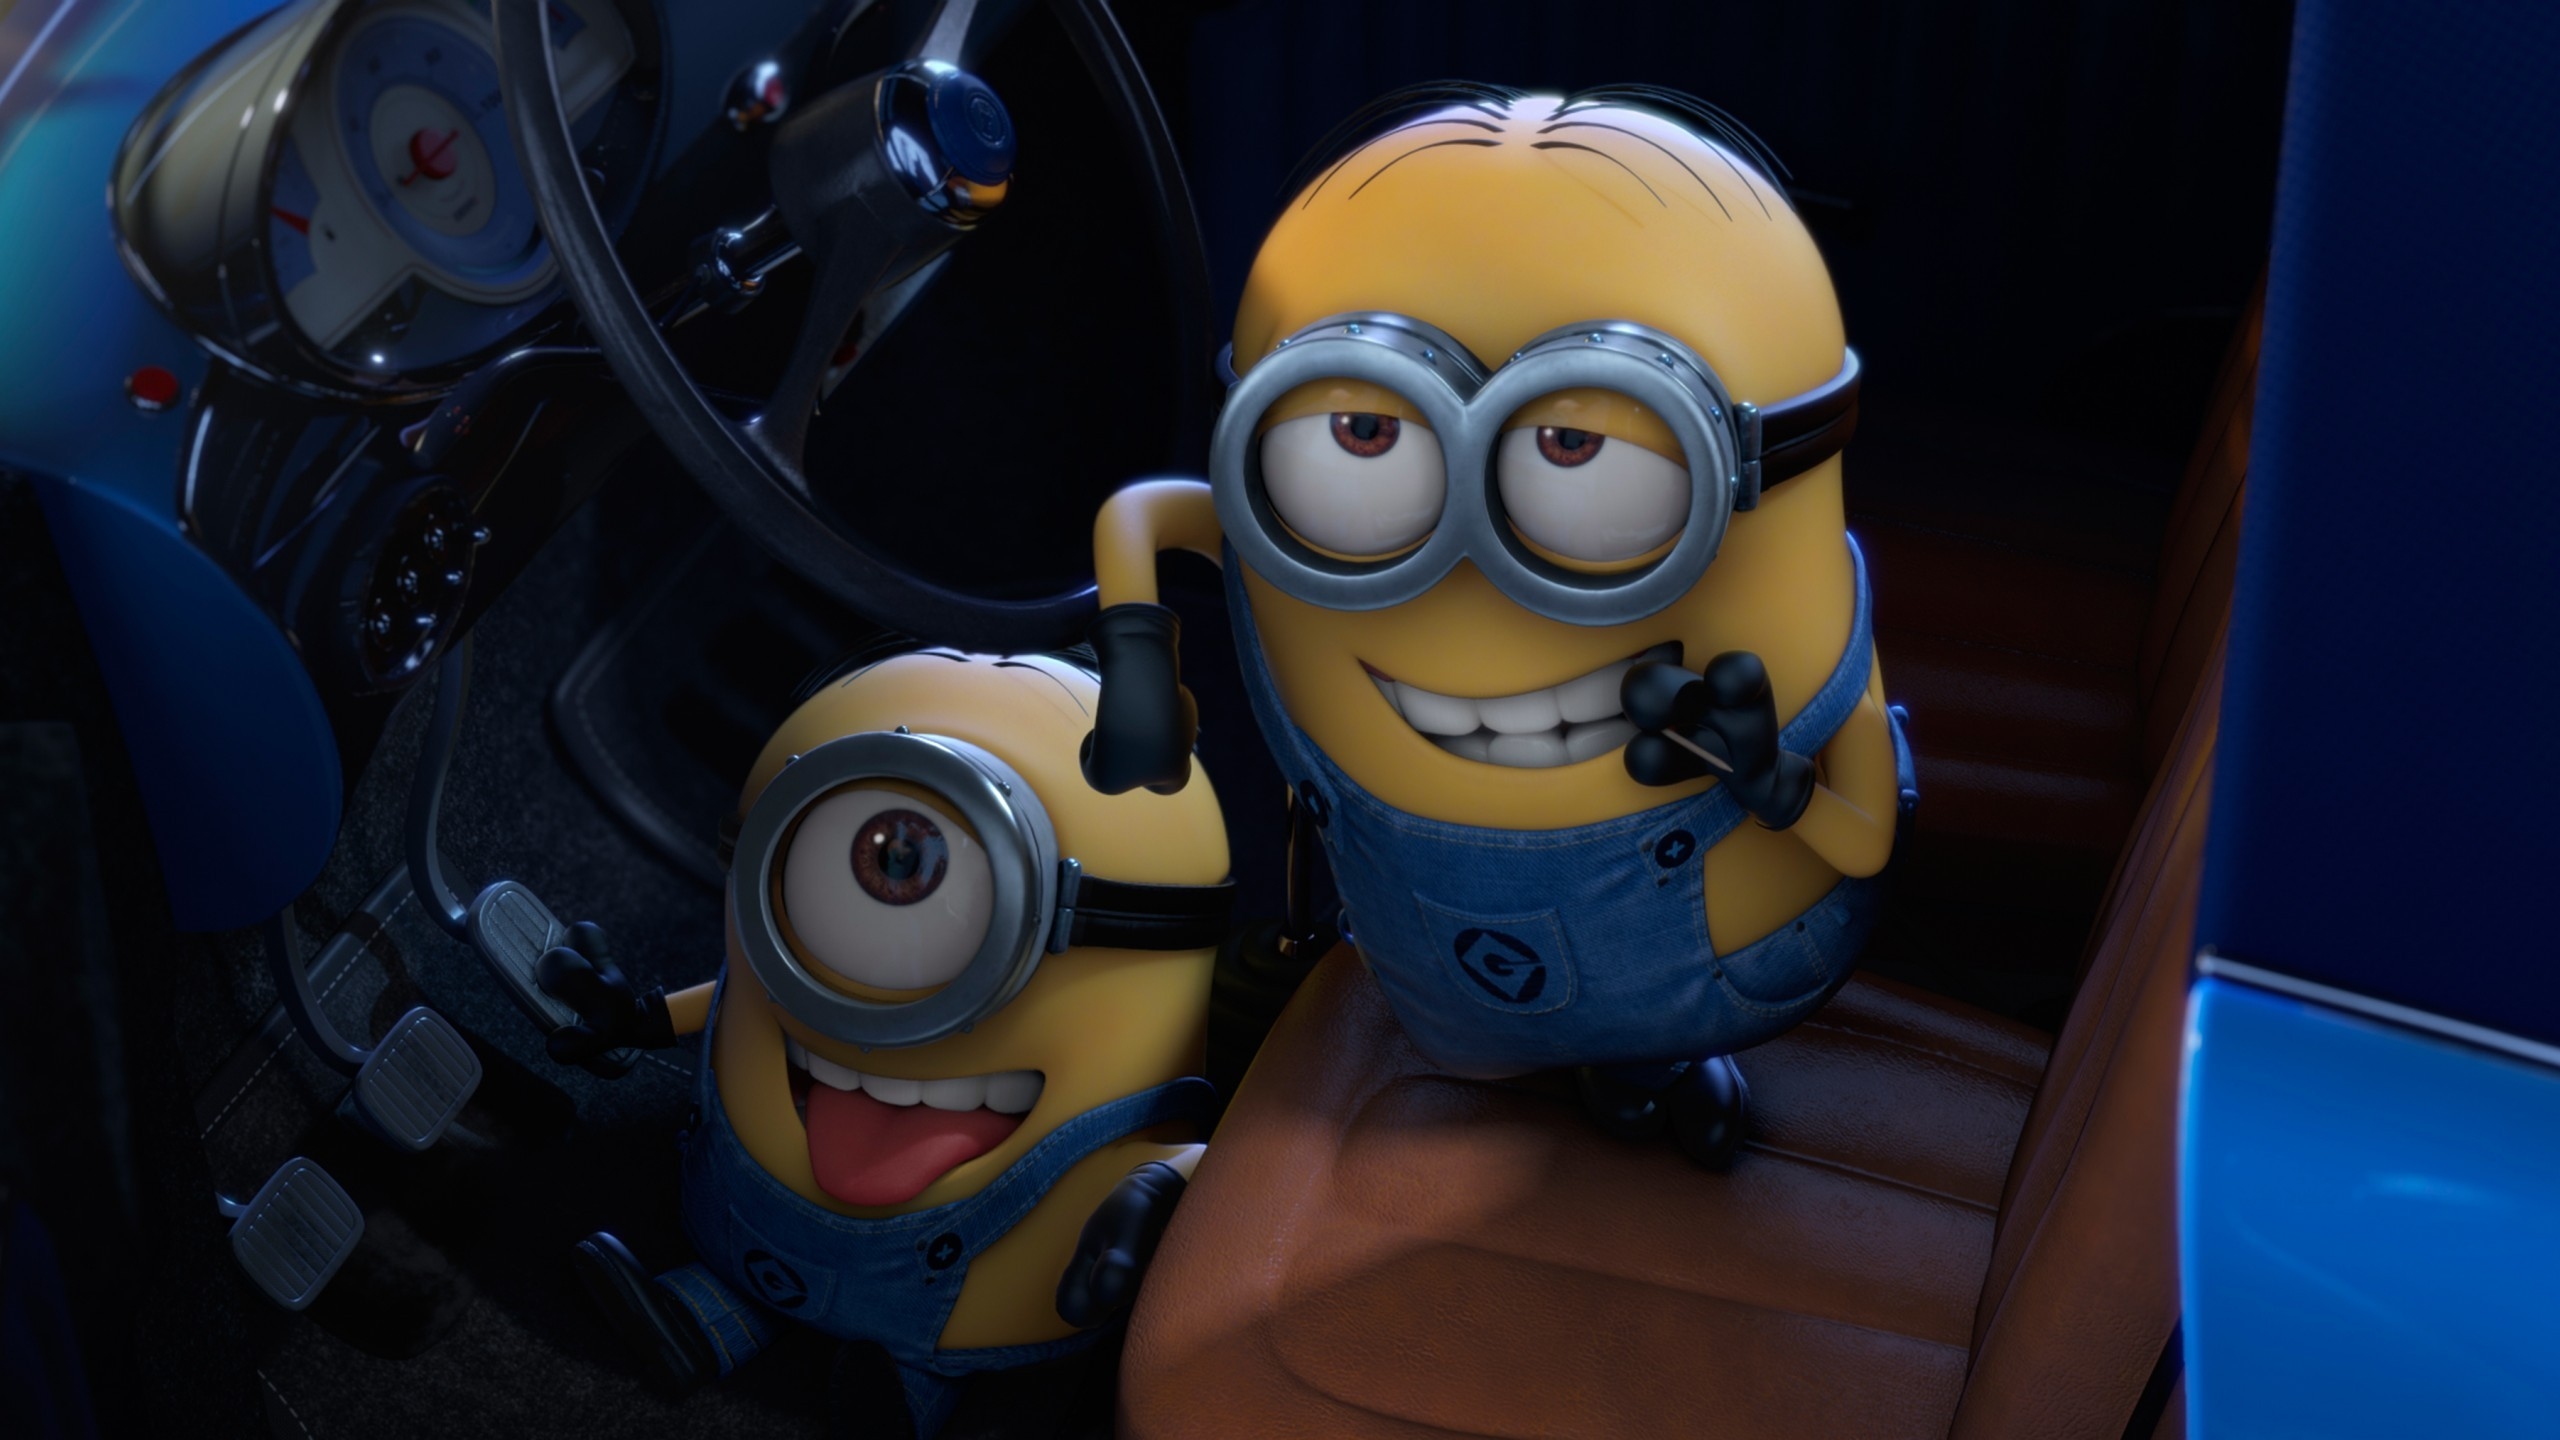 Despicable Me 2 Smile for 2560x1440 HDTV resolution